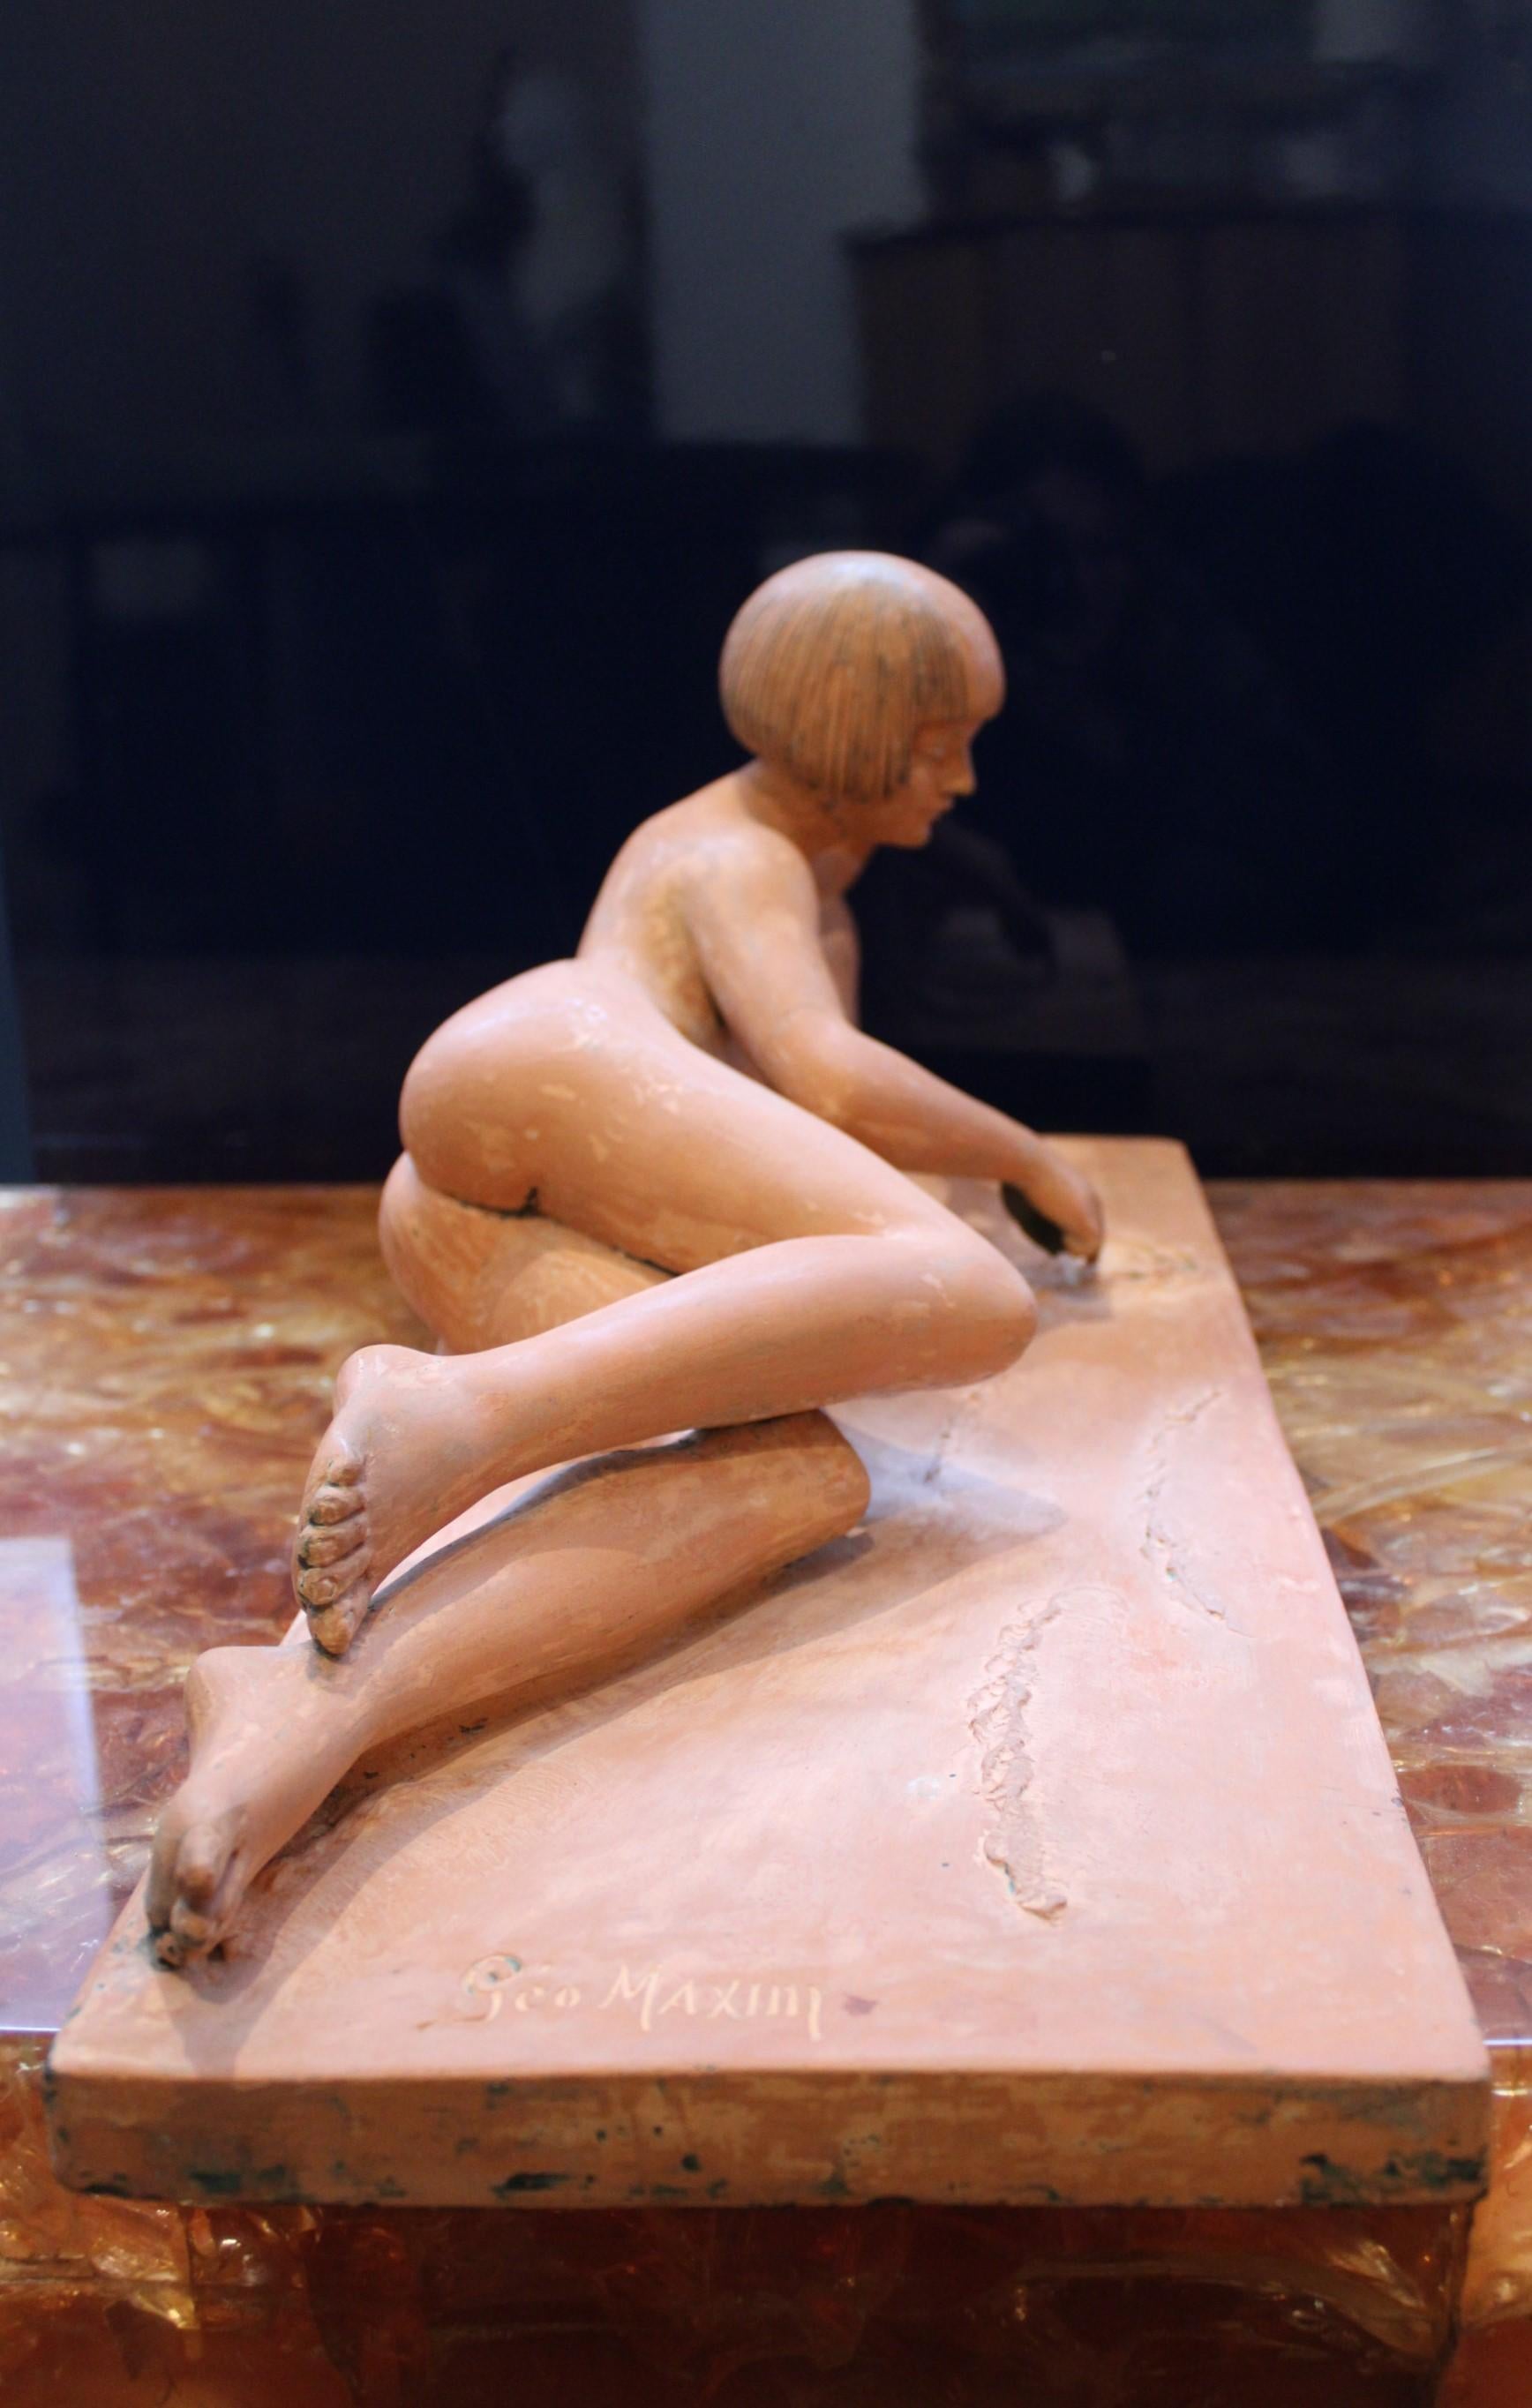 Terracotta Nude Woman Sculpture by George Maxim, France, 20th Century 6